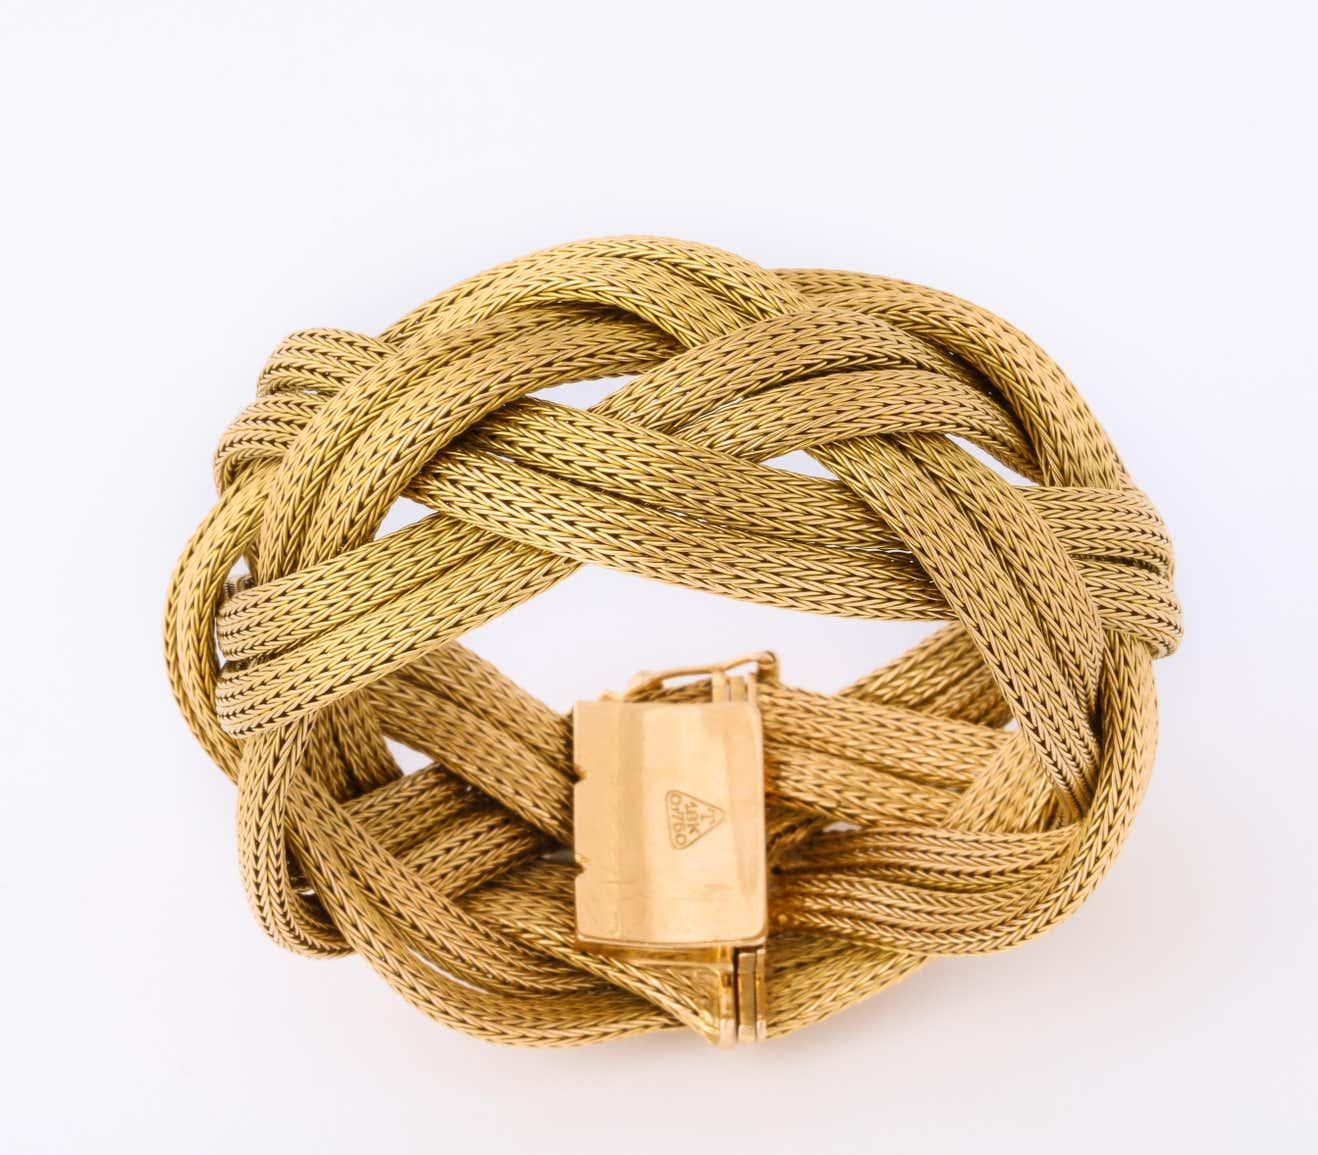 Women's 1960's Ultra Wide Twisted and Braided Flexible Gold Mesh Bracelet